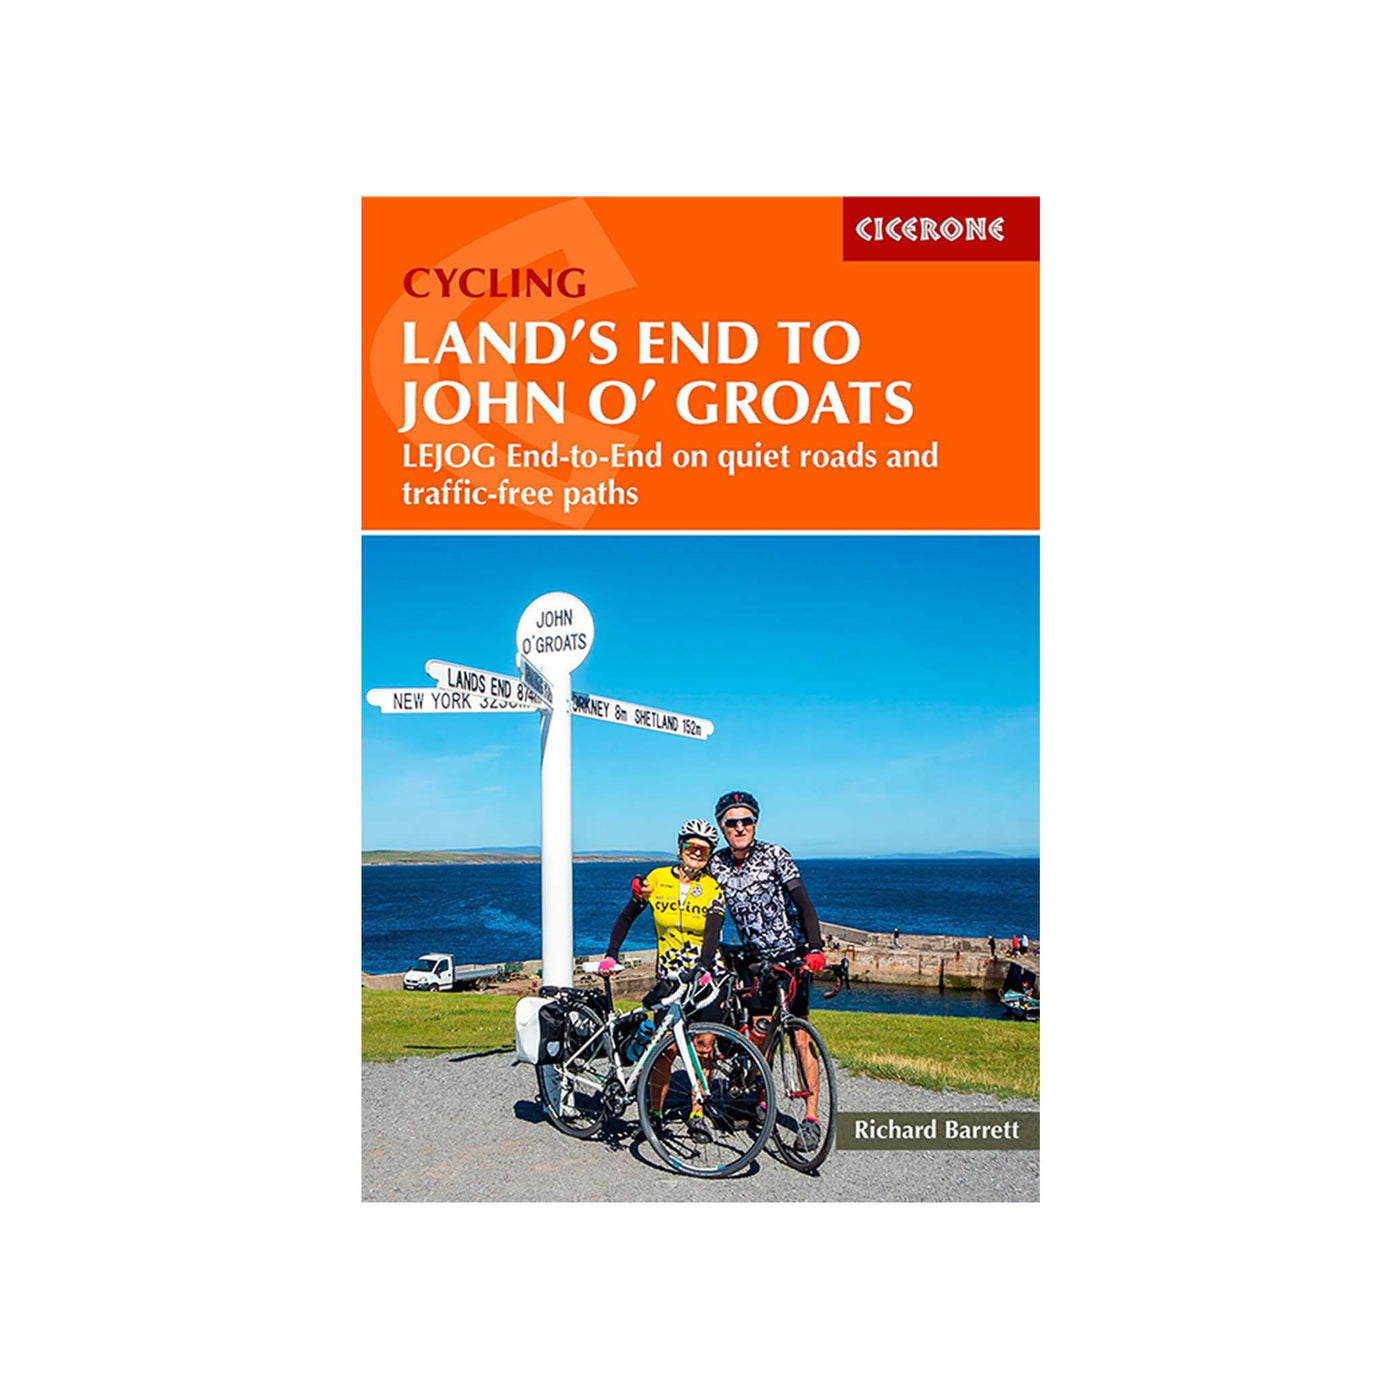 Cycling Land's End to John o'Groats guidebook by Cicerone. LEJOG on quiet roads and traffic-free paths. Author: Richard Barrett